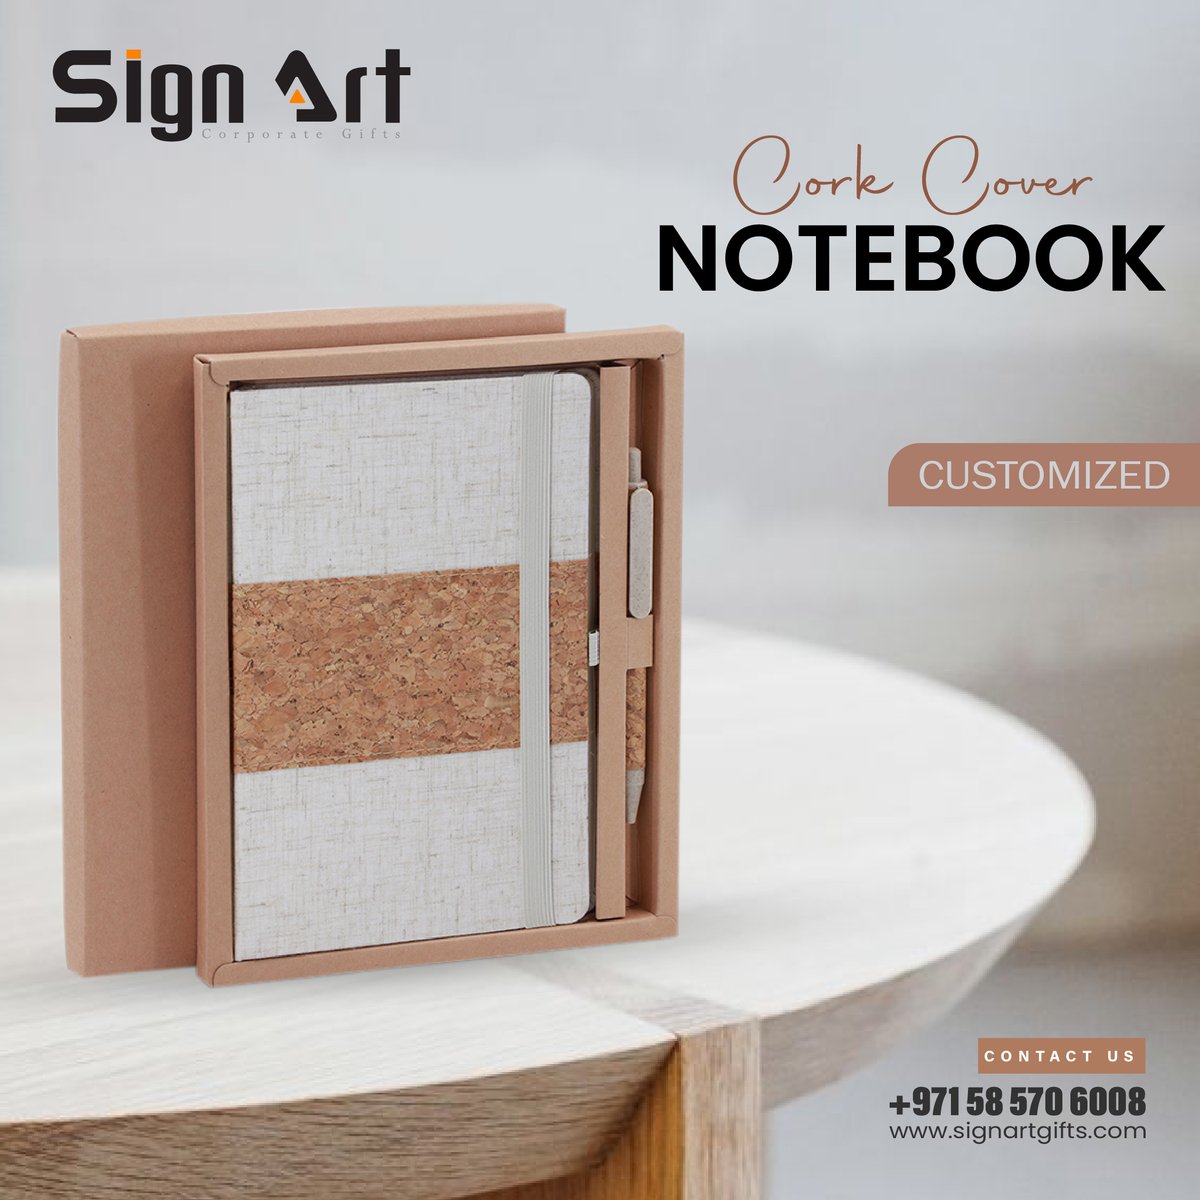 CORKNOTE SET
WhatsApp: 058 570 6008

Learn more: signartgifts.com

#customized #customizedgifts #promotionalproducts #corknote #notebook #screenprinting #promotionalgifts #giftsindubai #officebranding #printingservices #dubaiprinting #giftsupplie #dtfprinting